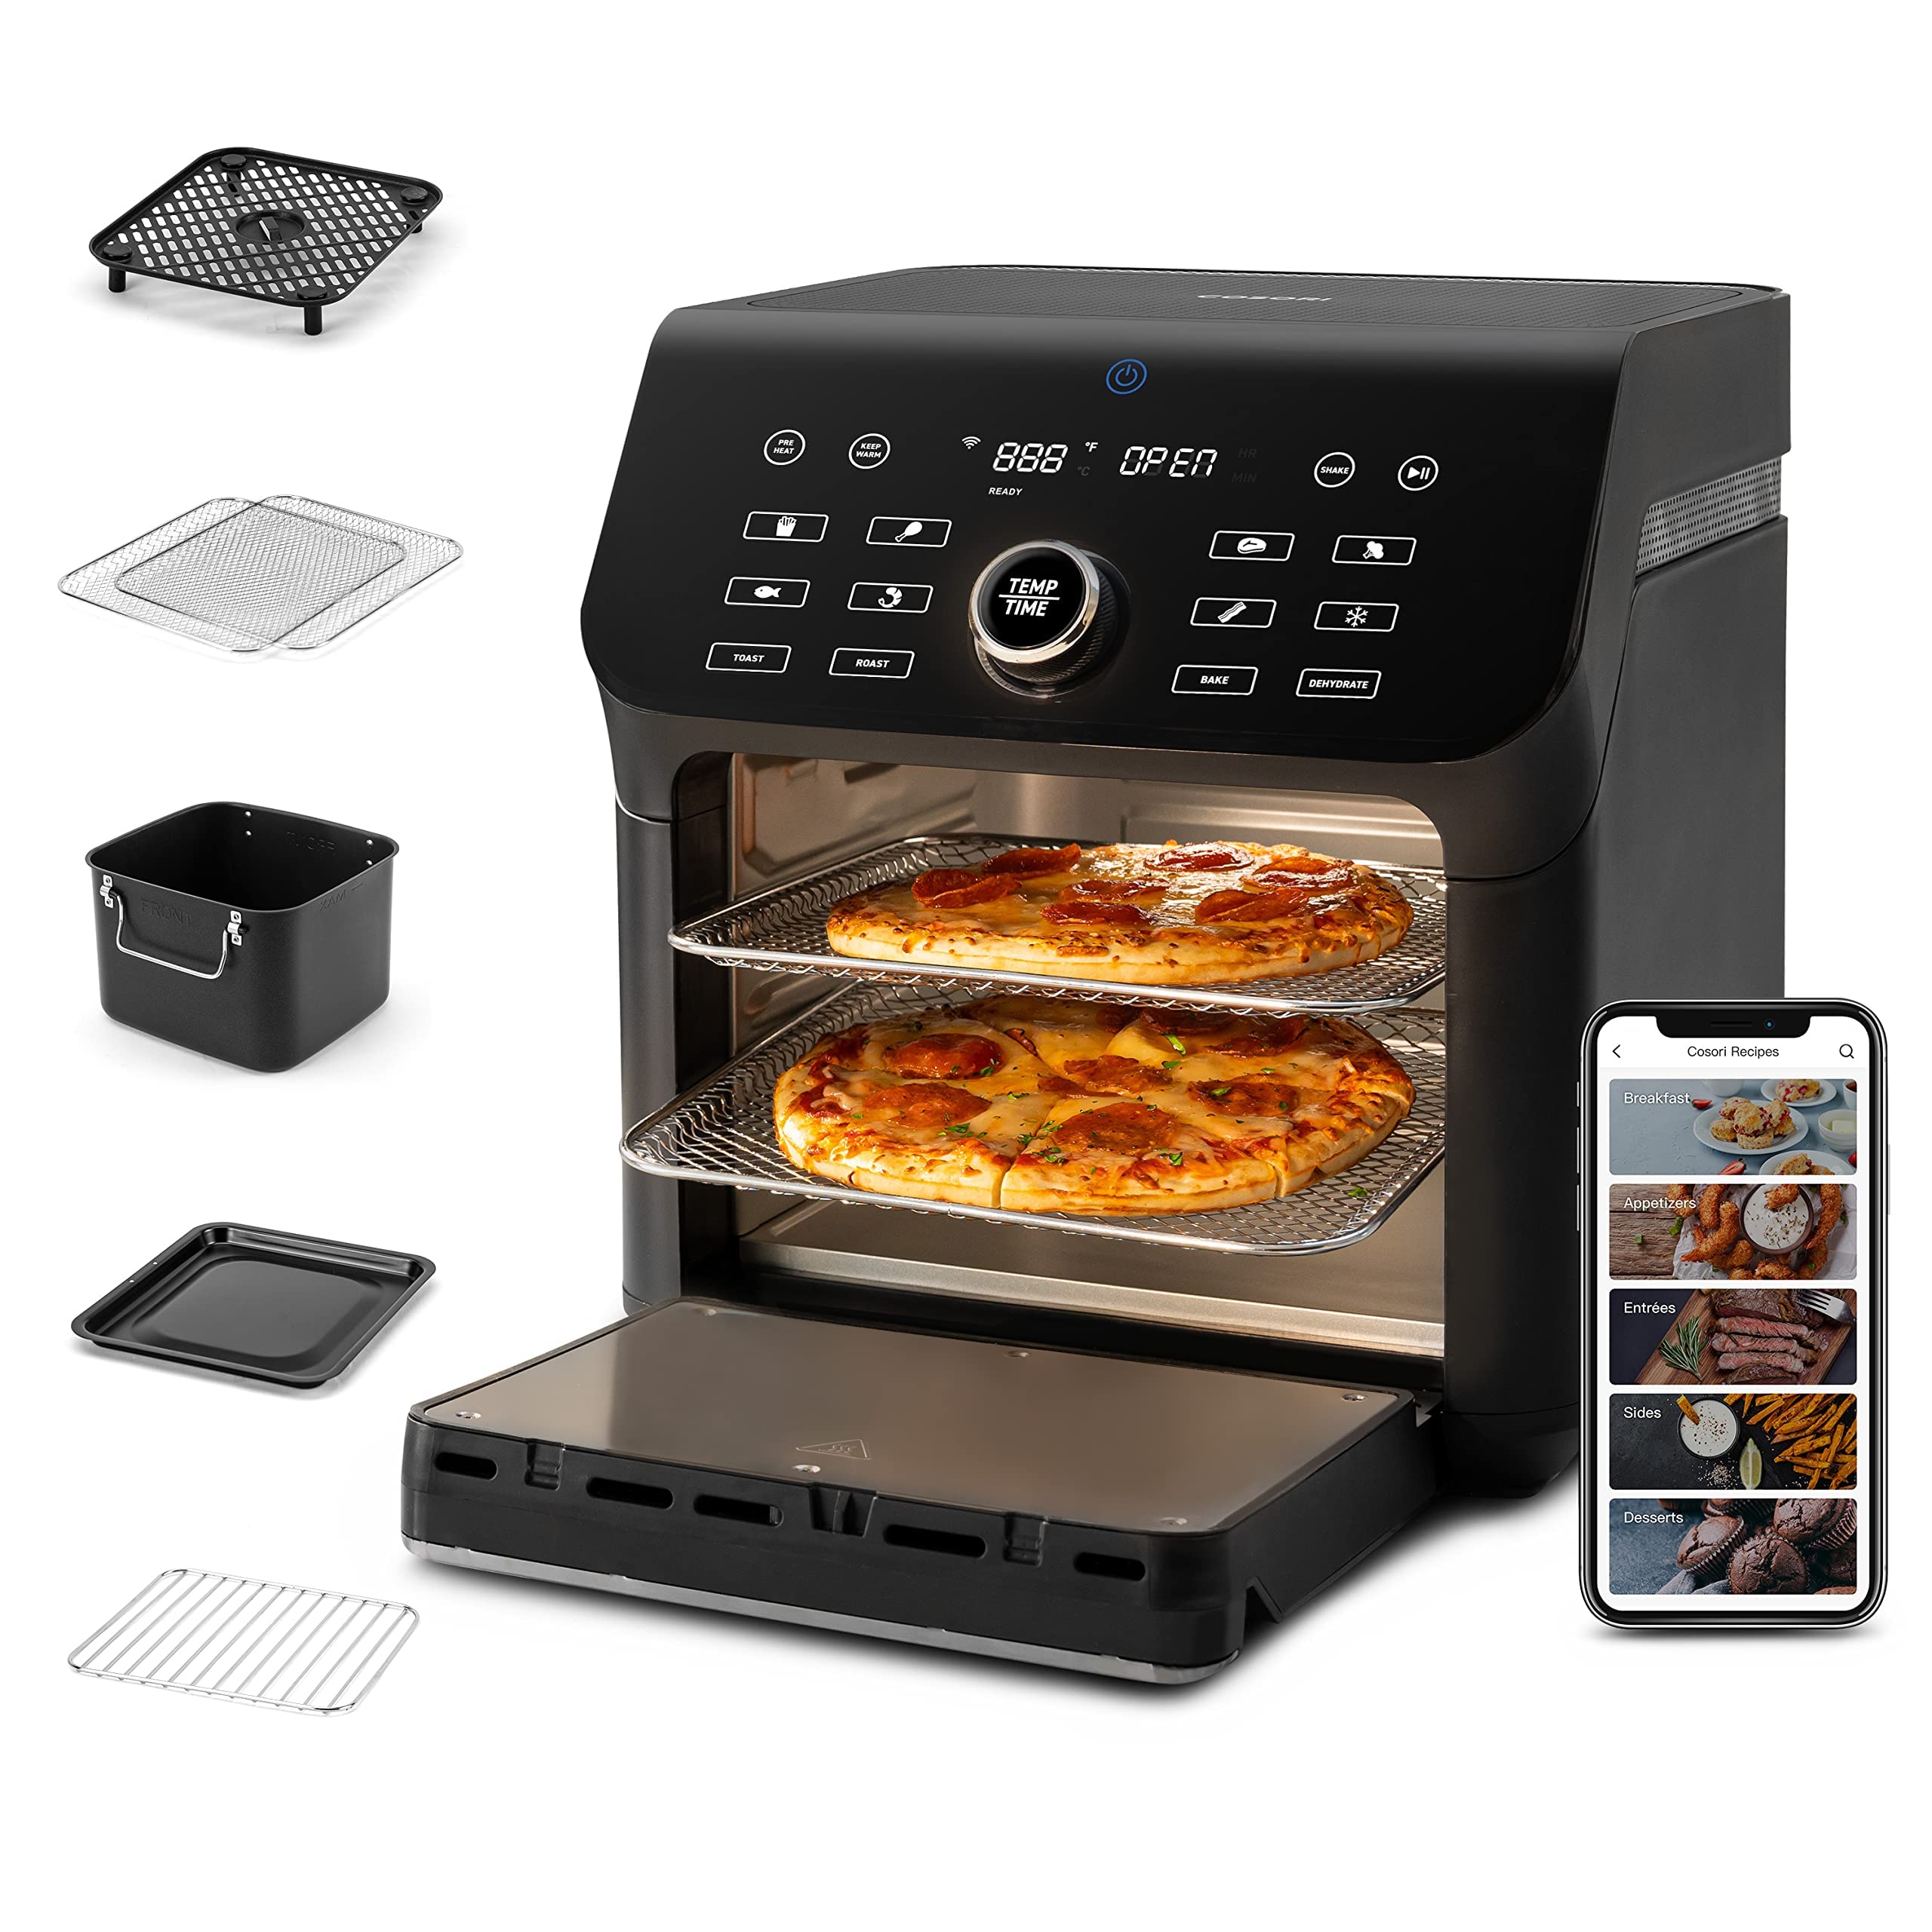 COSORI Air Fryer Toaster Oven Combo, 10 Qt Family Size, 14-in-1 Functions with Dehydrate, Roast, Smart Control Through Phone & Voice, 1000+ In-APP Recipes & 6 Dishwasher -Safe Accessories, Black